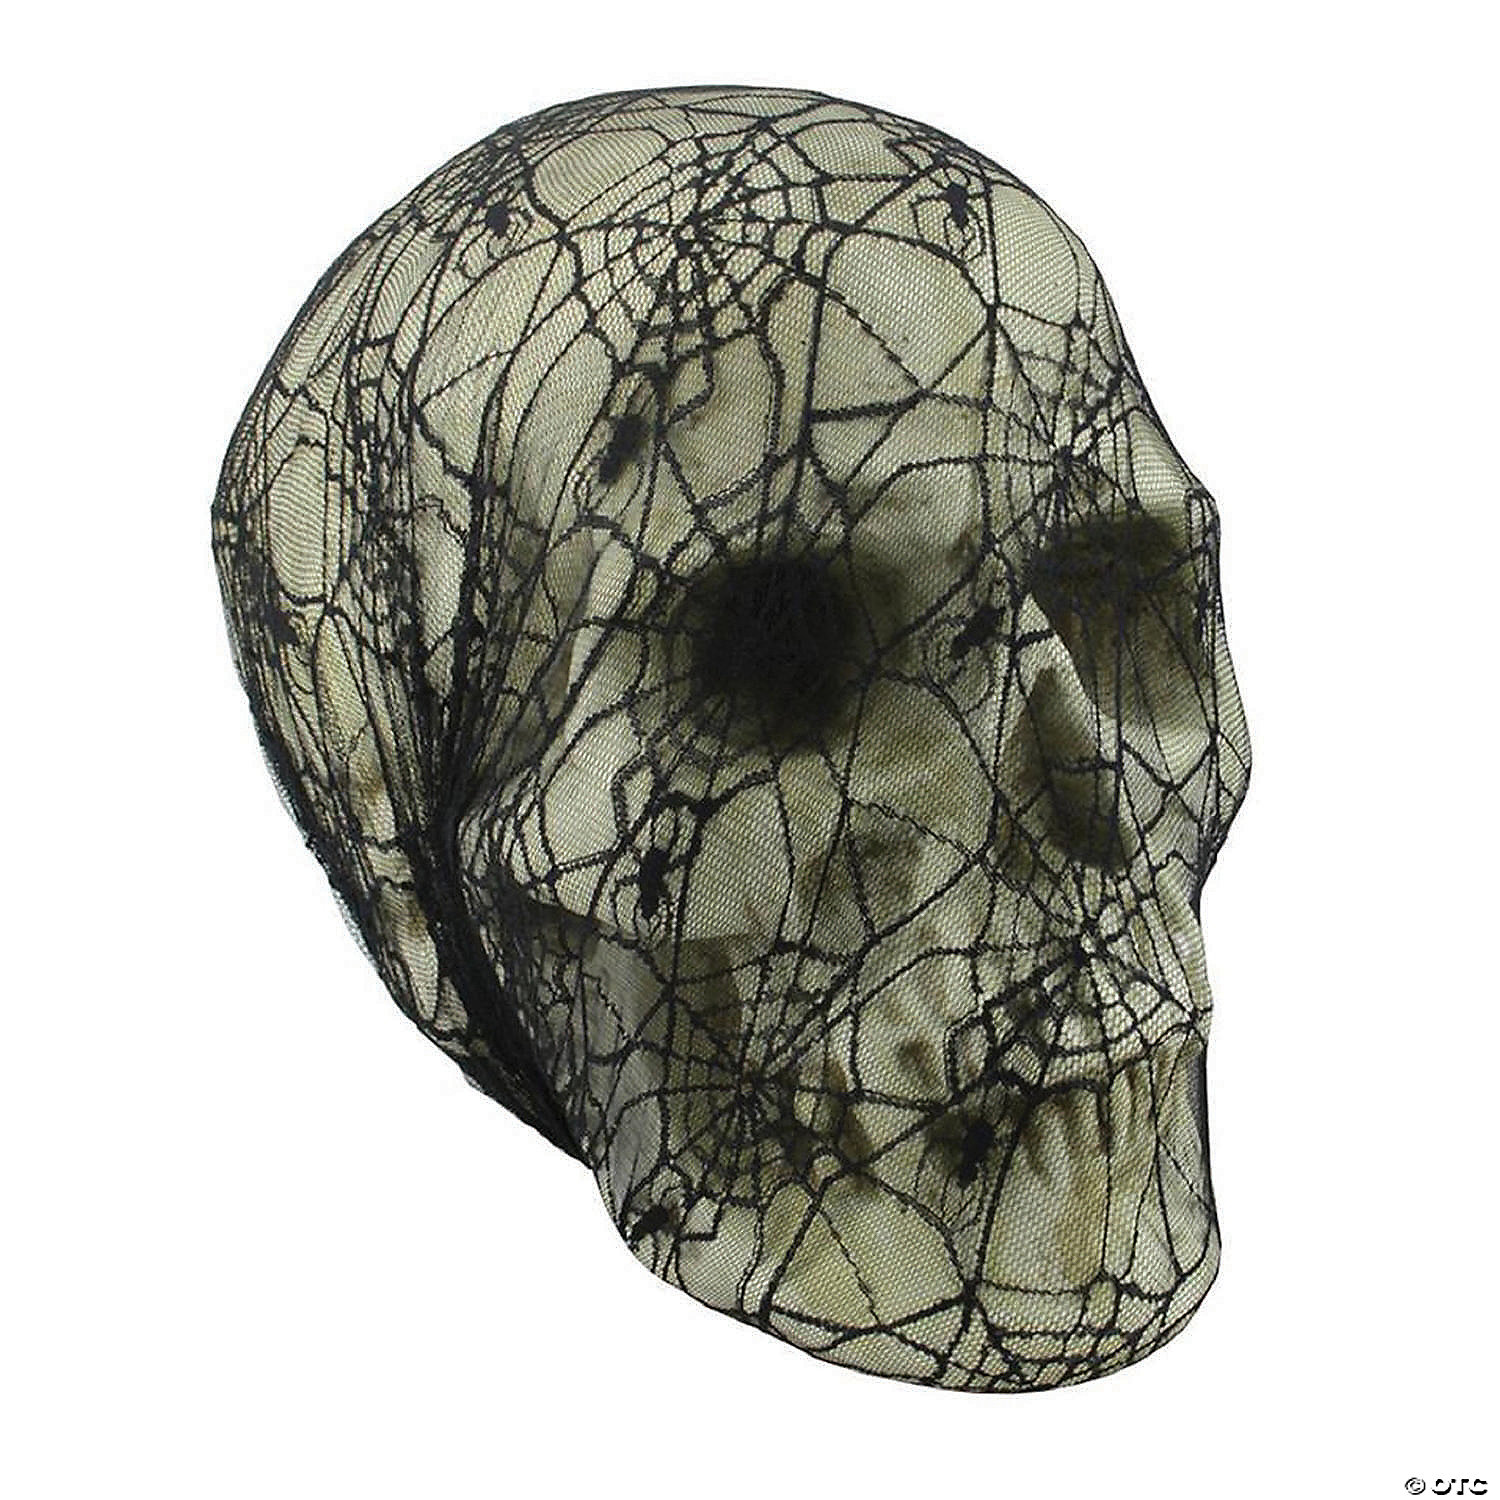 spider web and skull drawings